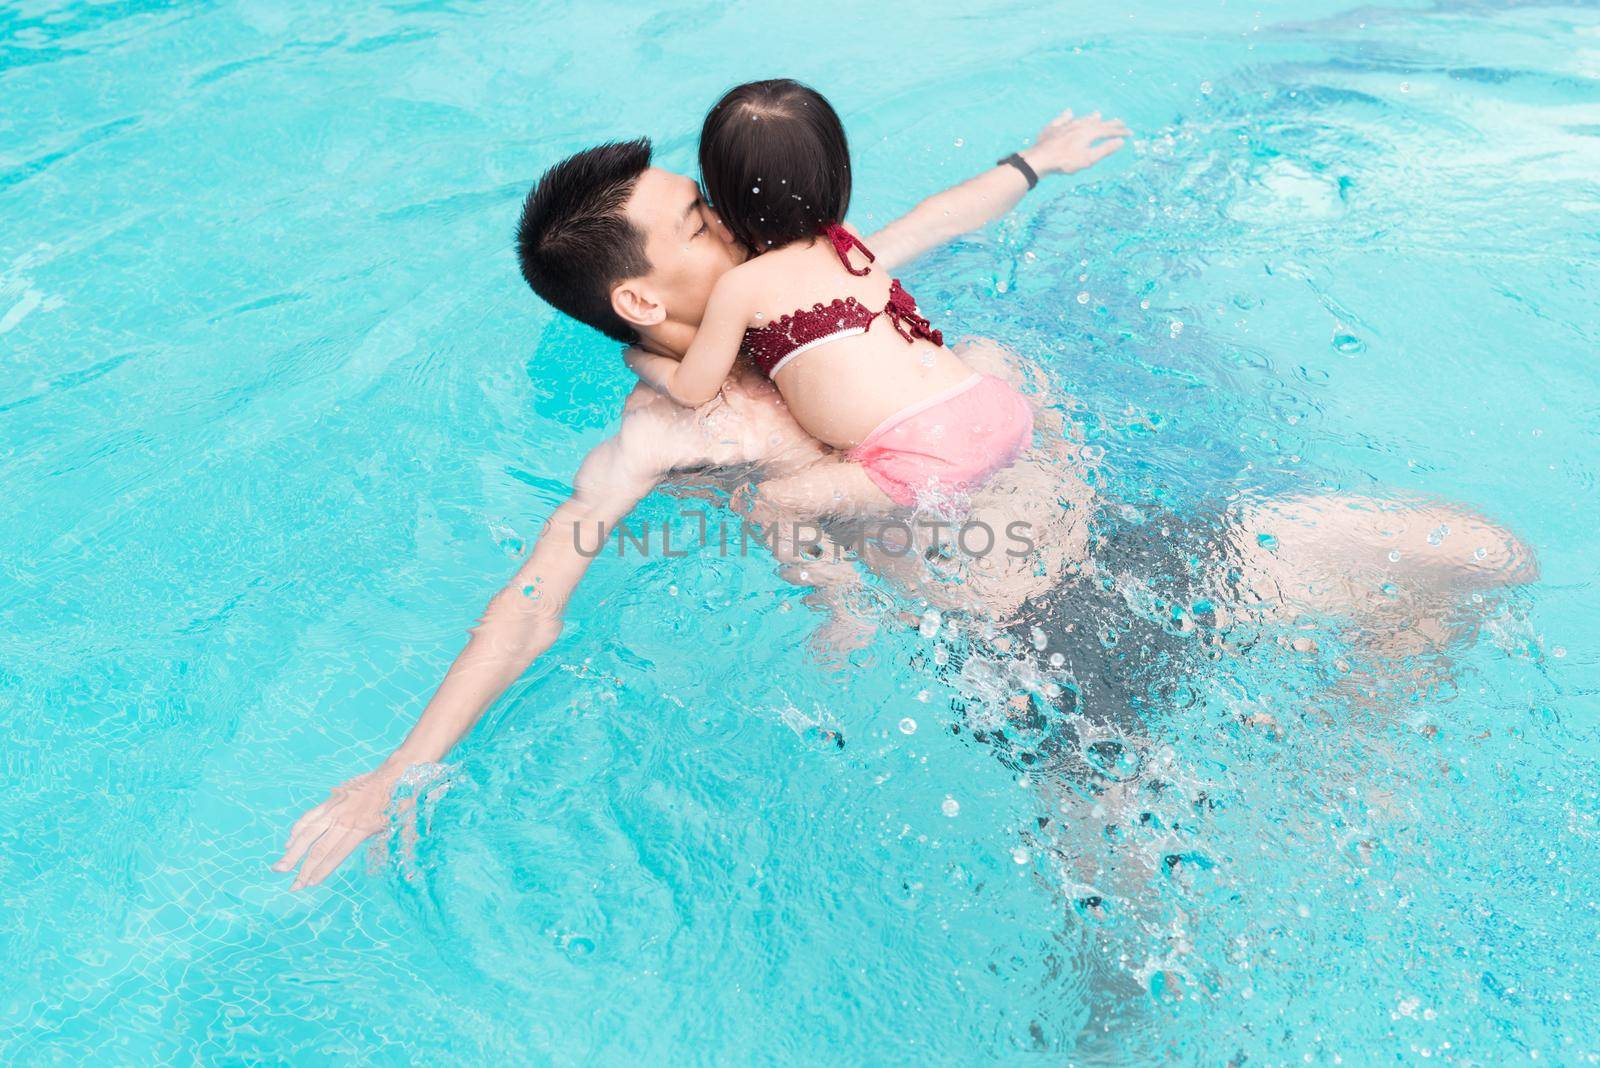 Father and daughter having fun in the pool. Summer holidays and vacation concept by makidotvn